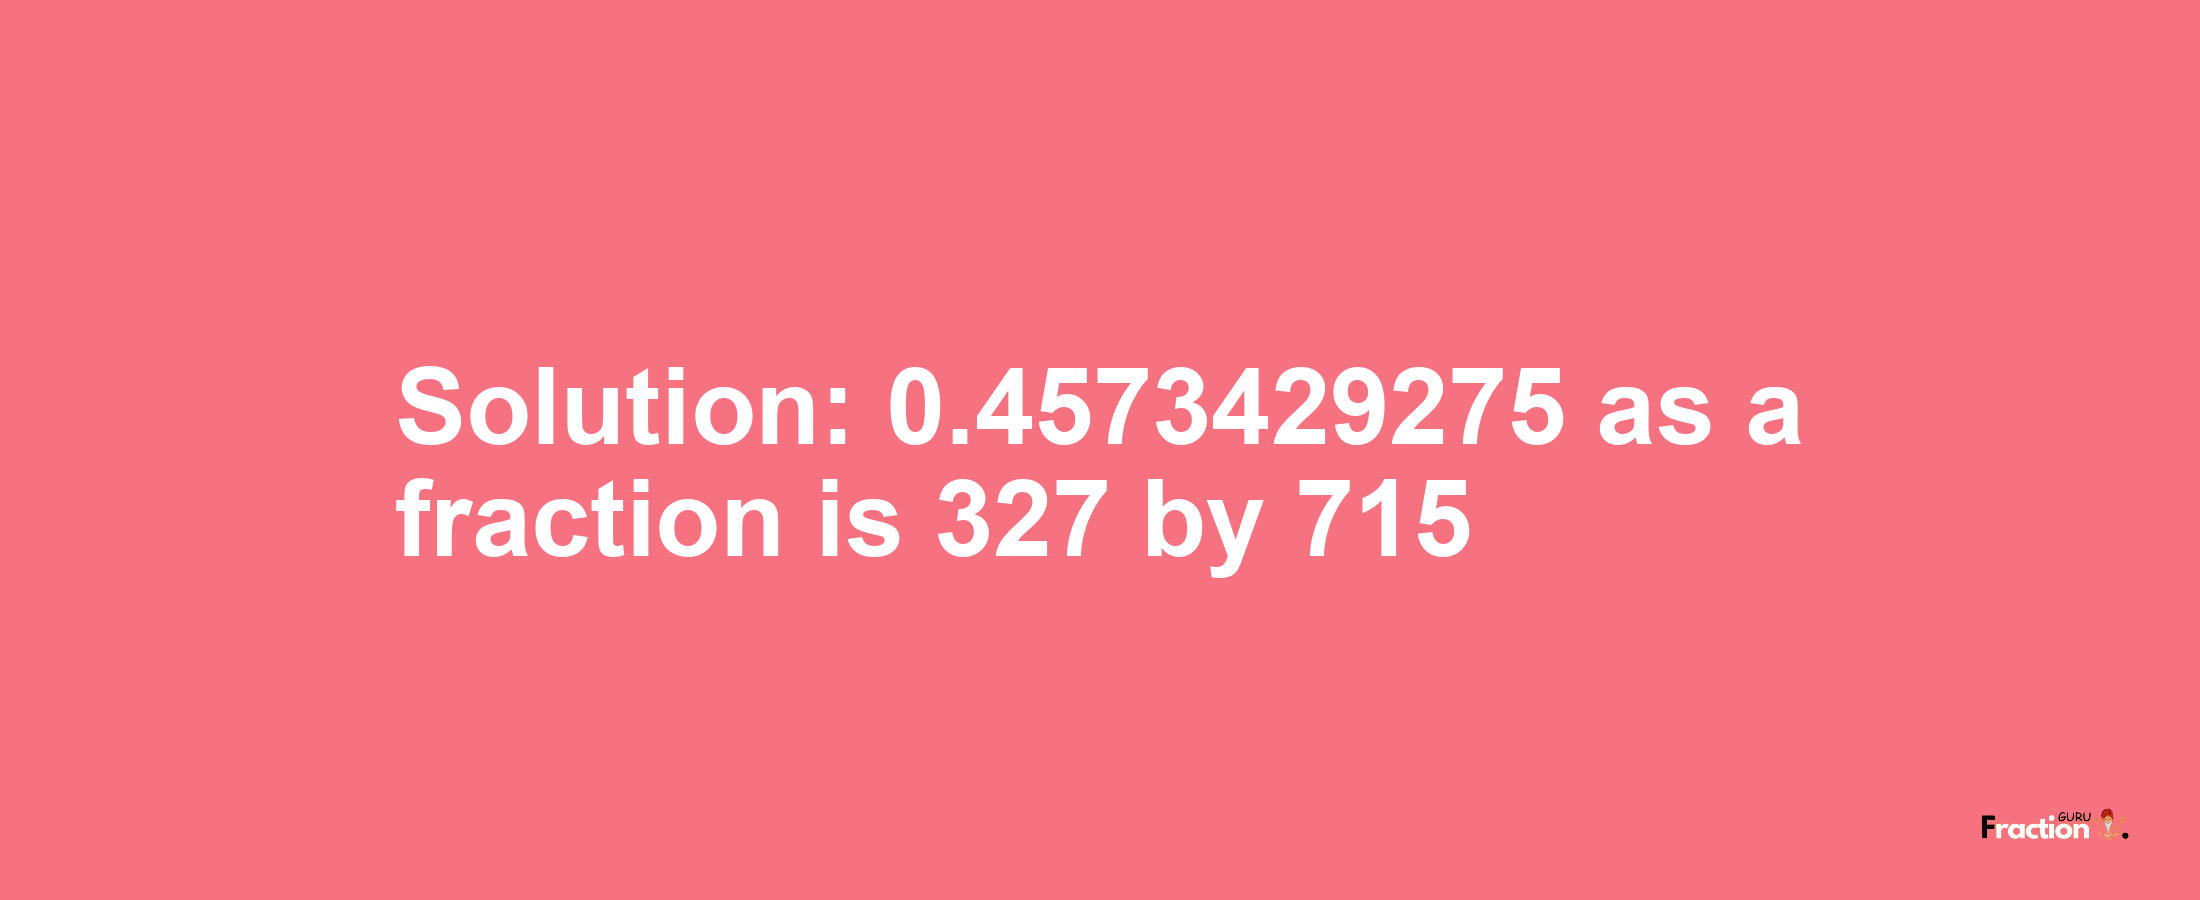 Solution:0.4573429275 as a fraction is 327/715